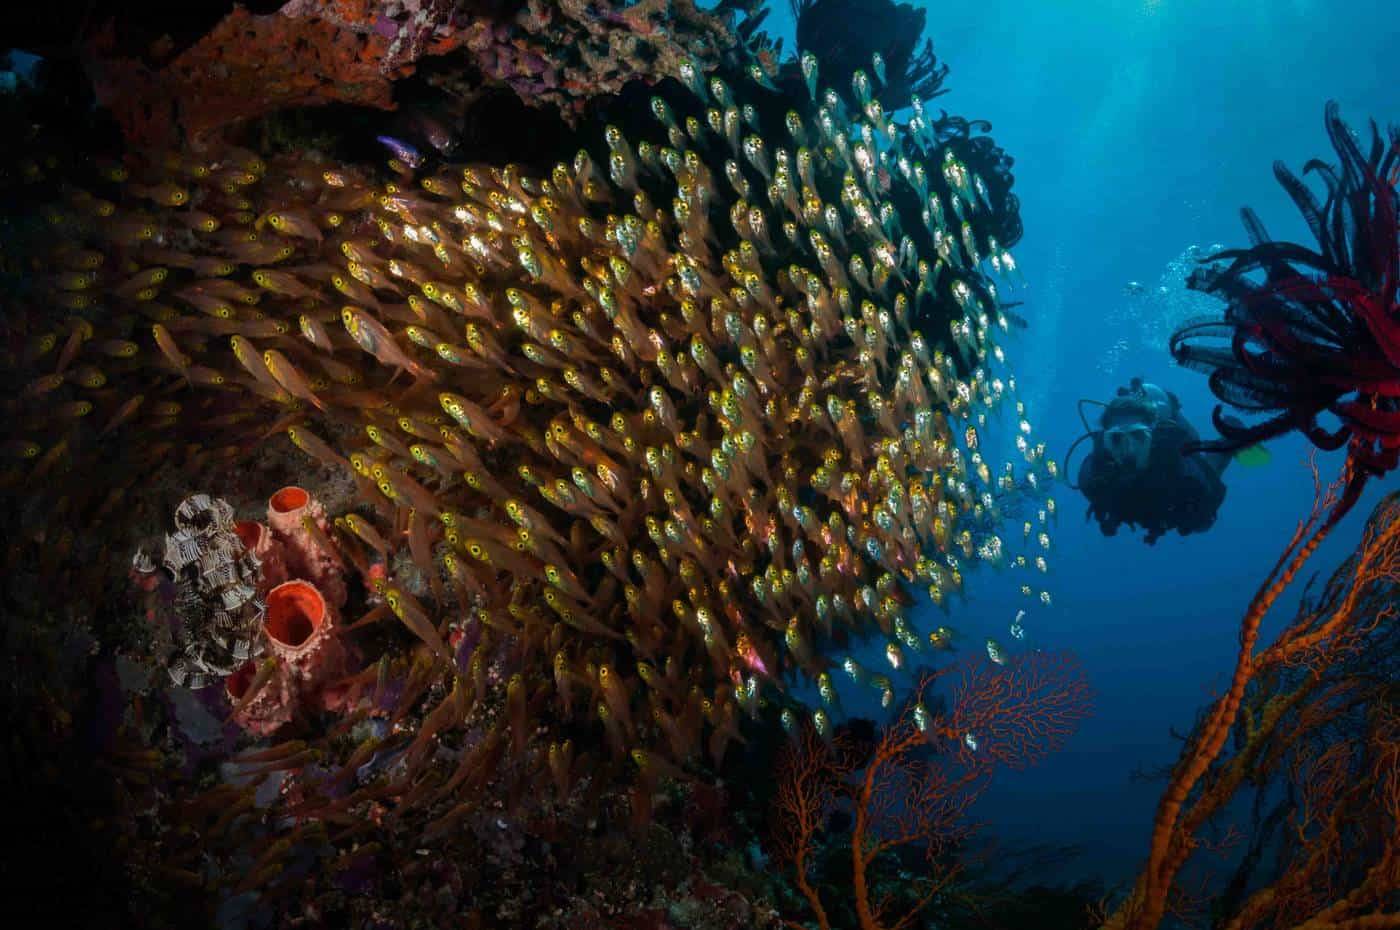 BUNAKEN MARINE PARK (AT THE HEART OF THE CORAL TRIANGLE)